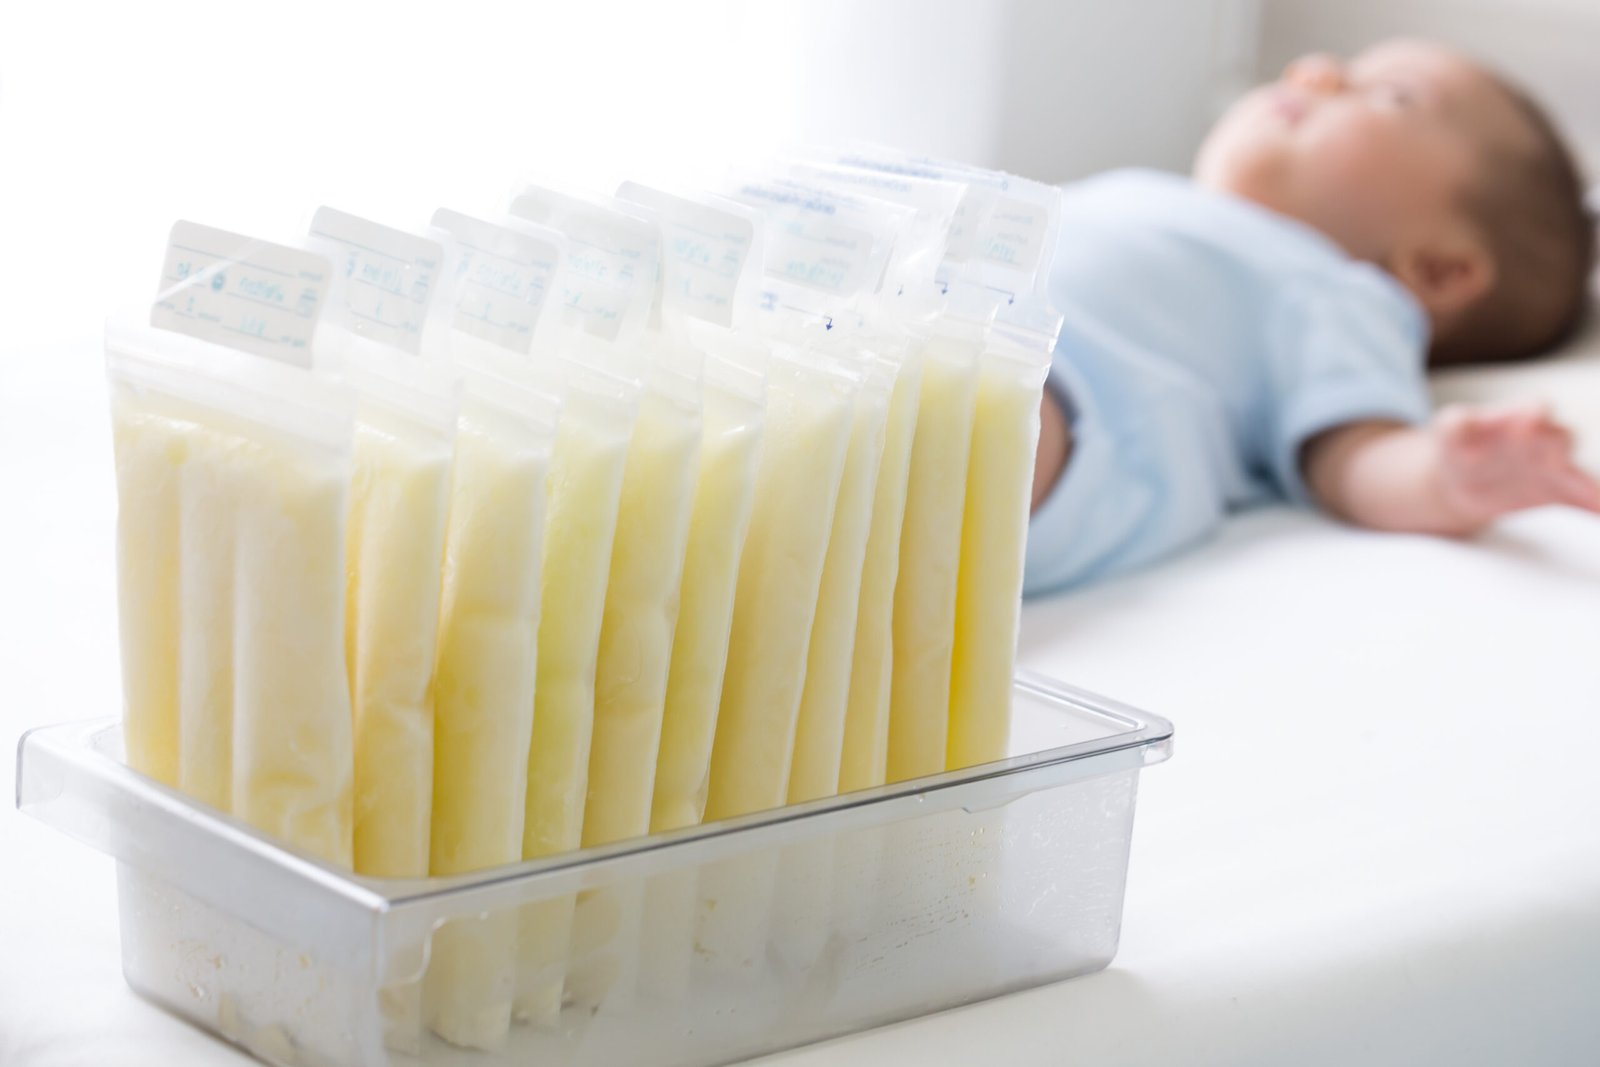 Reusable breast milk storage containers/bags